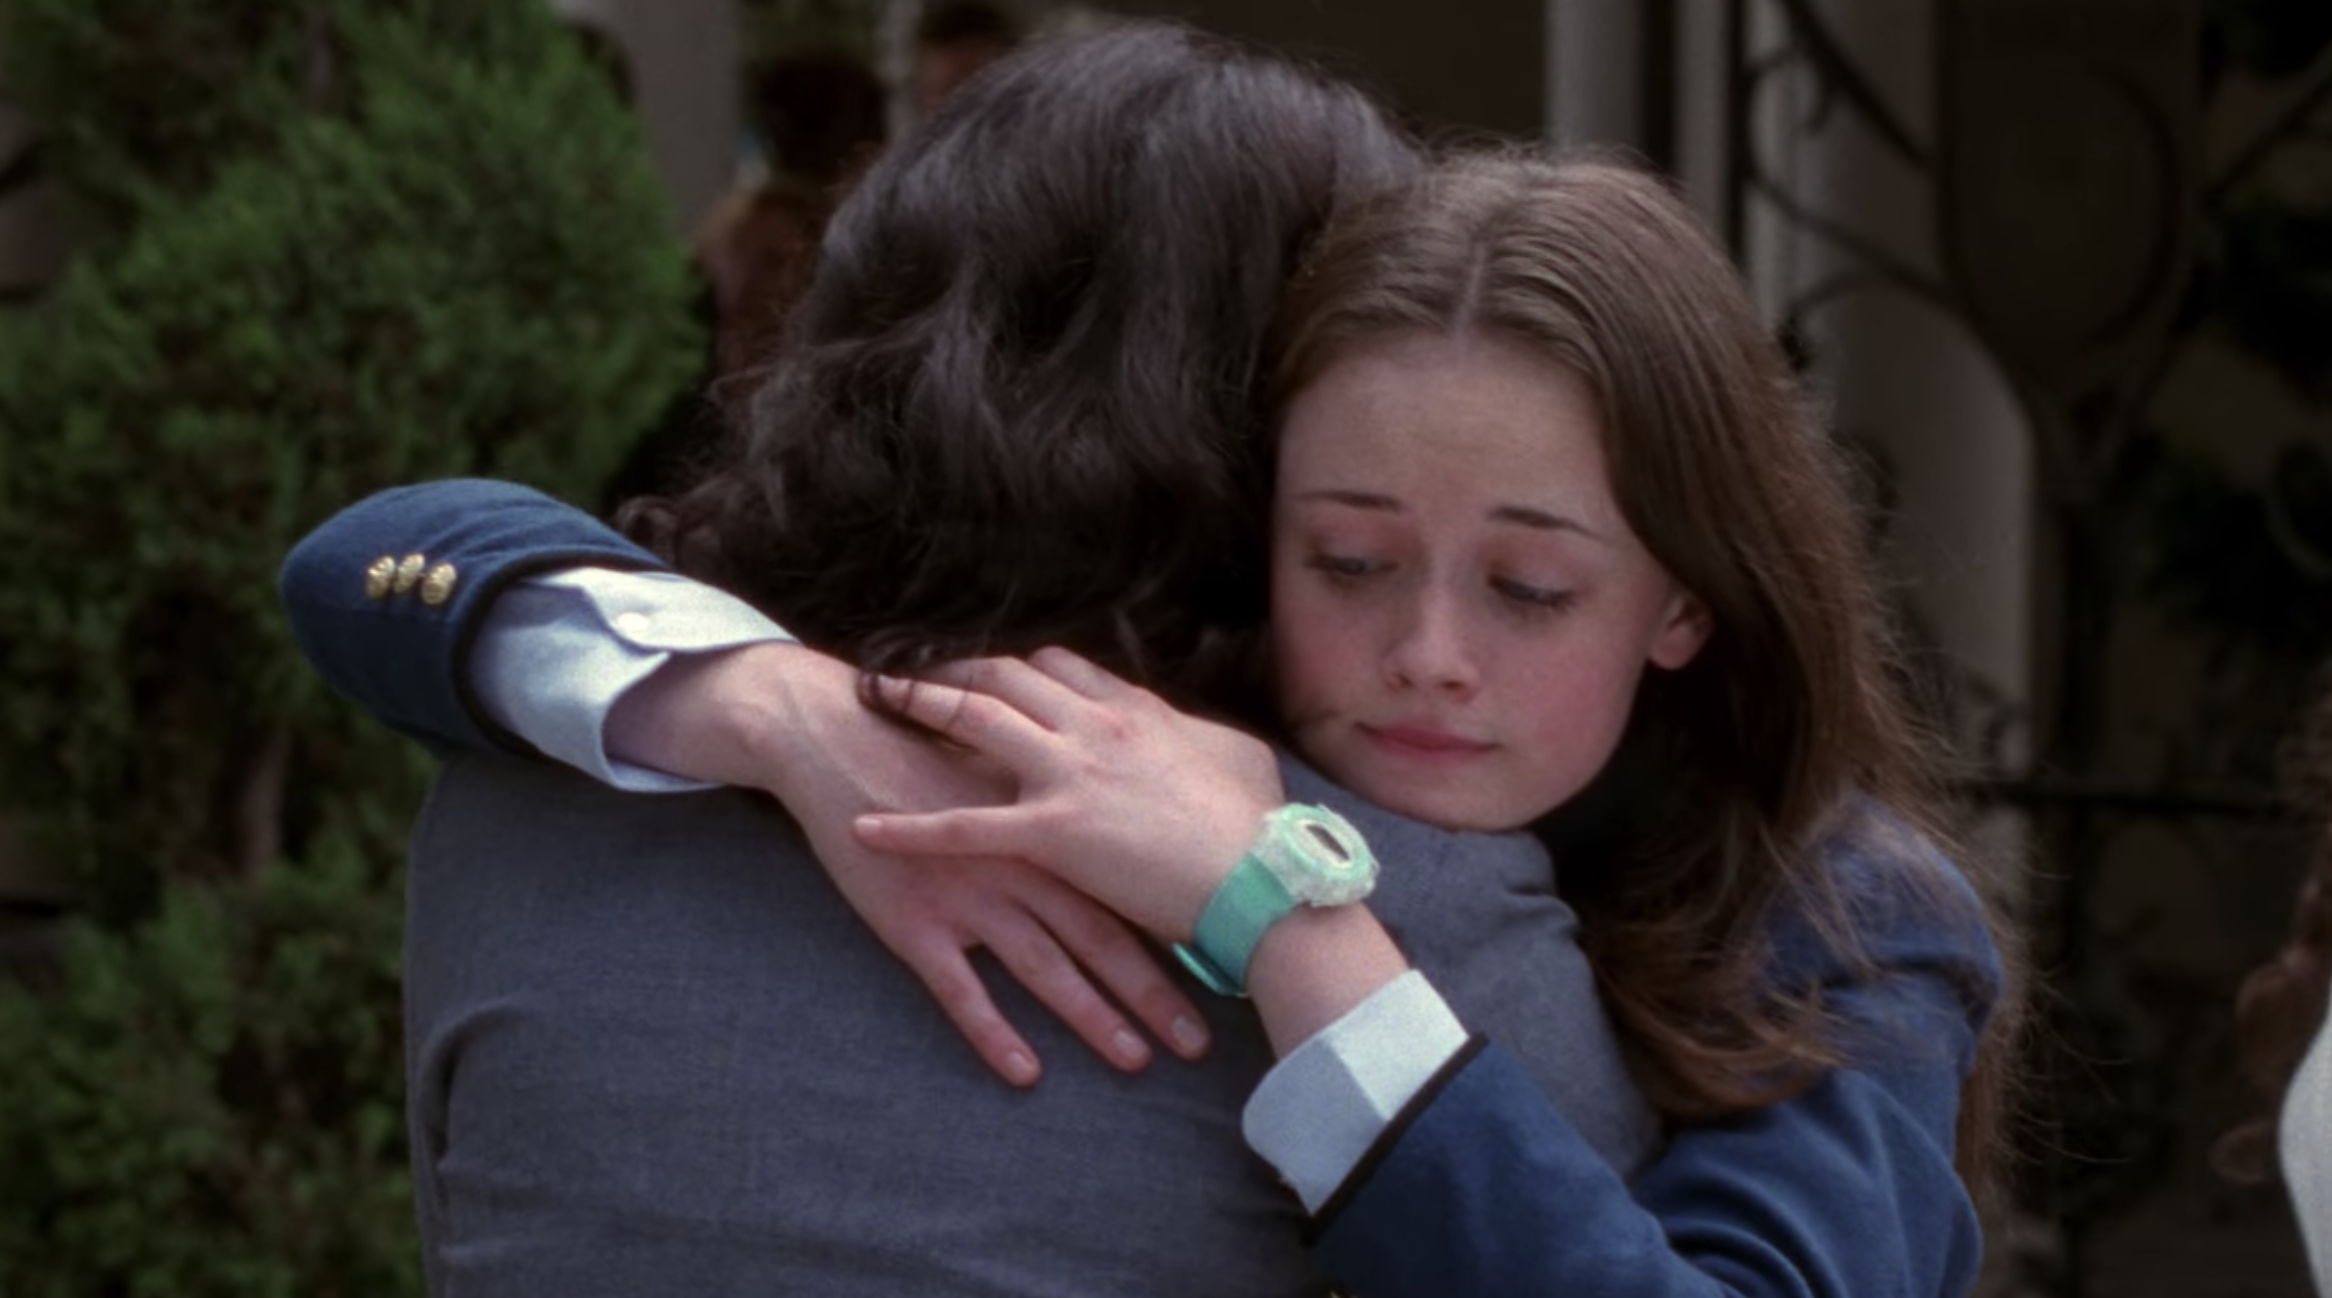 Rory hugging her mom and wearing the watch